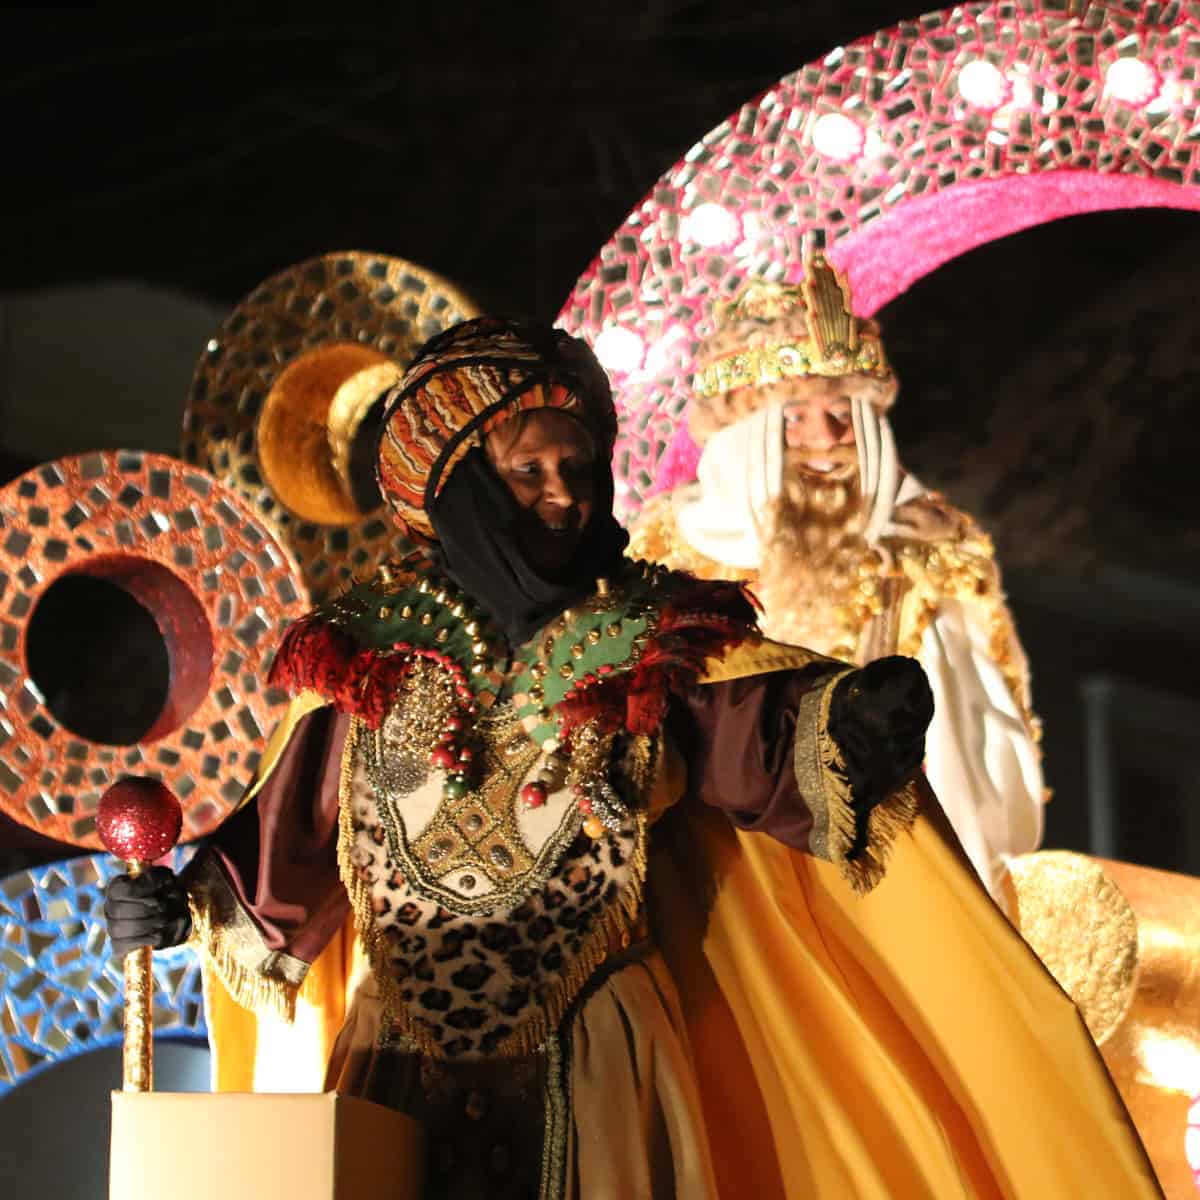 Melchor, one of the three wise men, on a float in a 3 King's Day procession in Spain